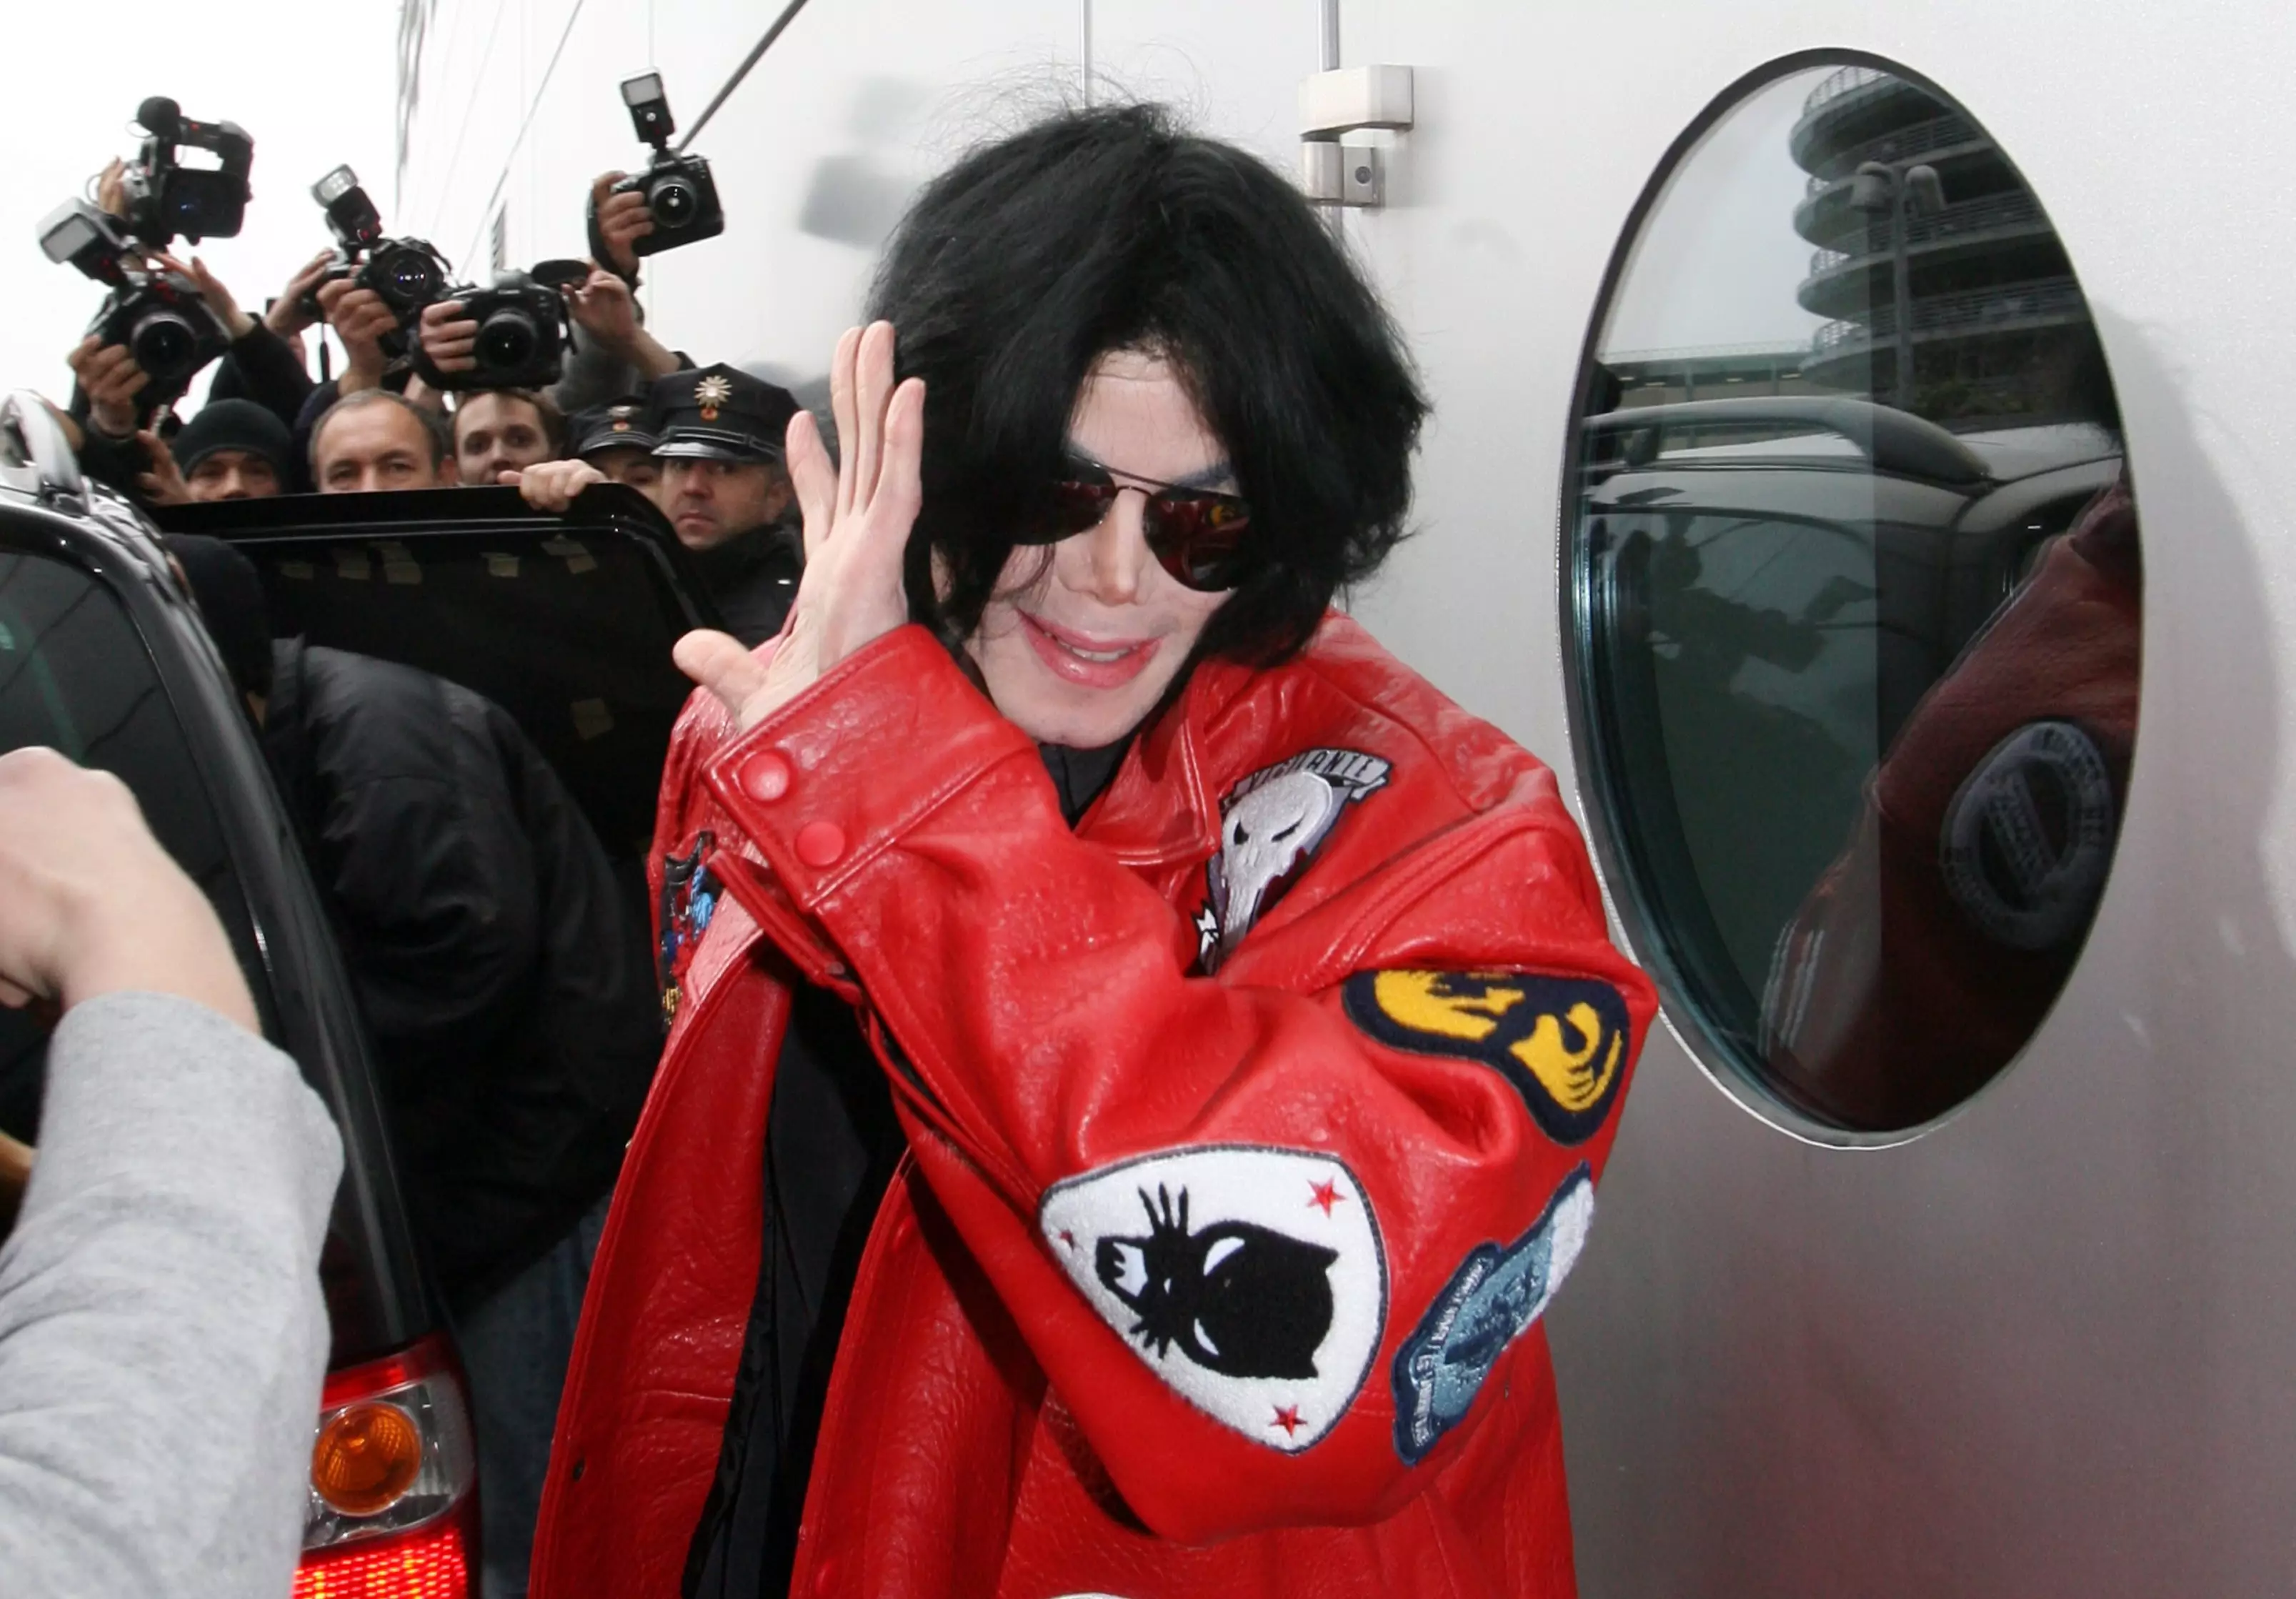 Jackson died in 2009 of an overdose.